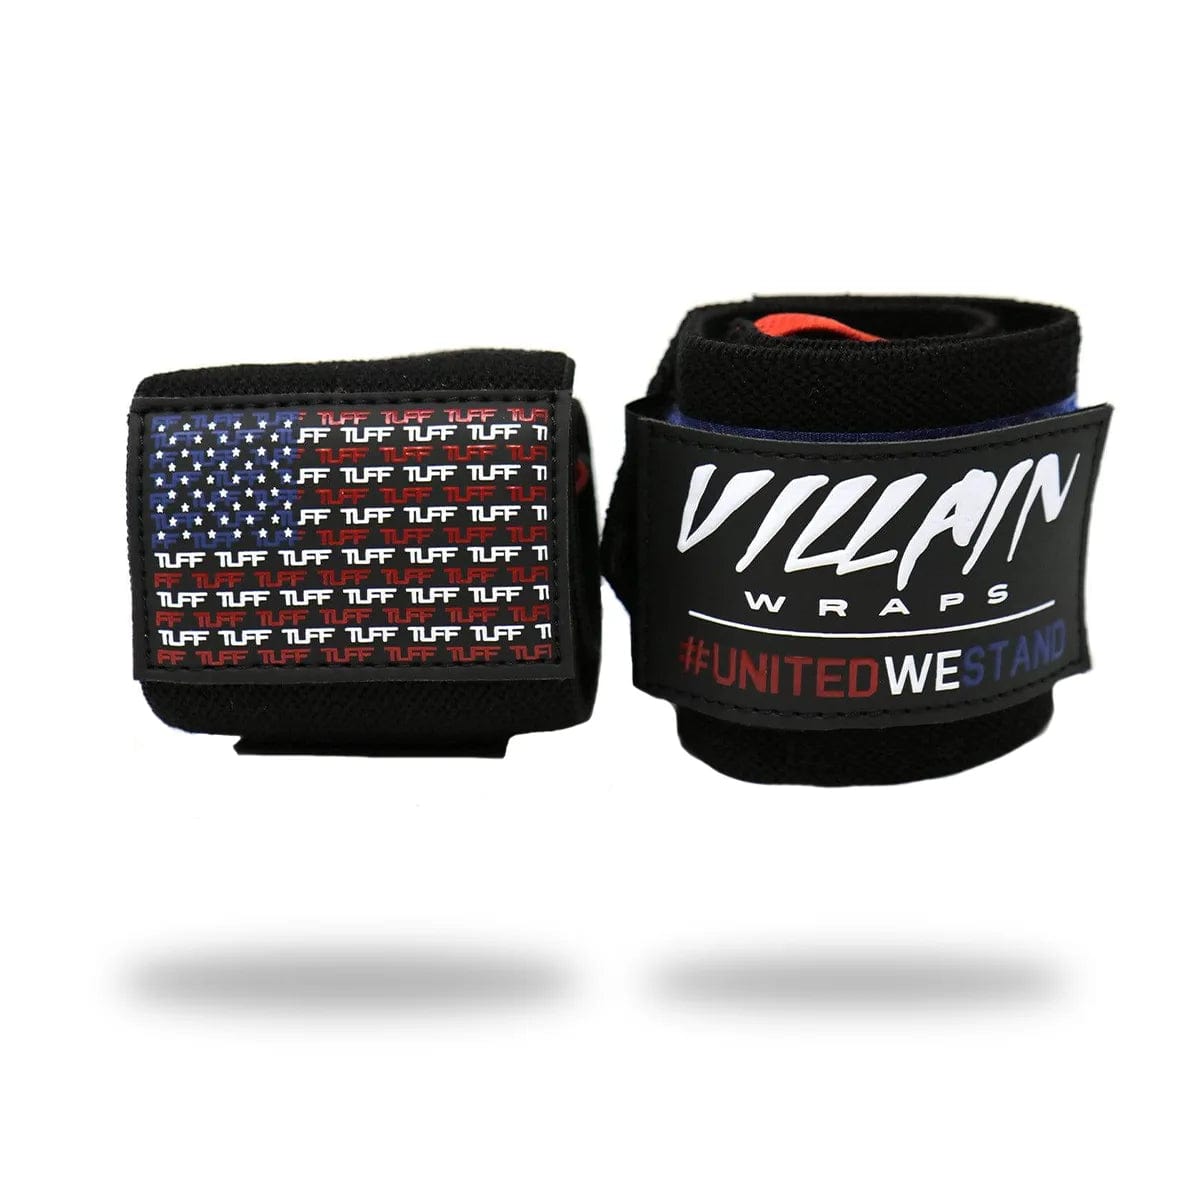 Villain Wrist Wraps  No Thumb Loop for Superior Wrist Support